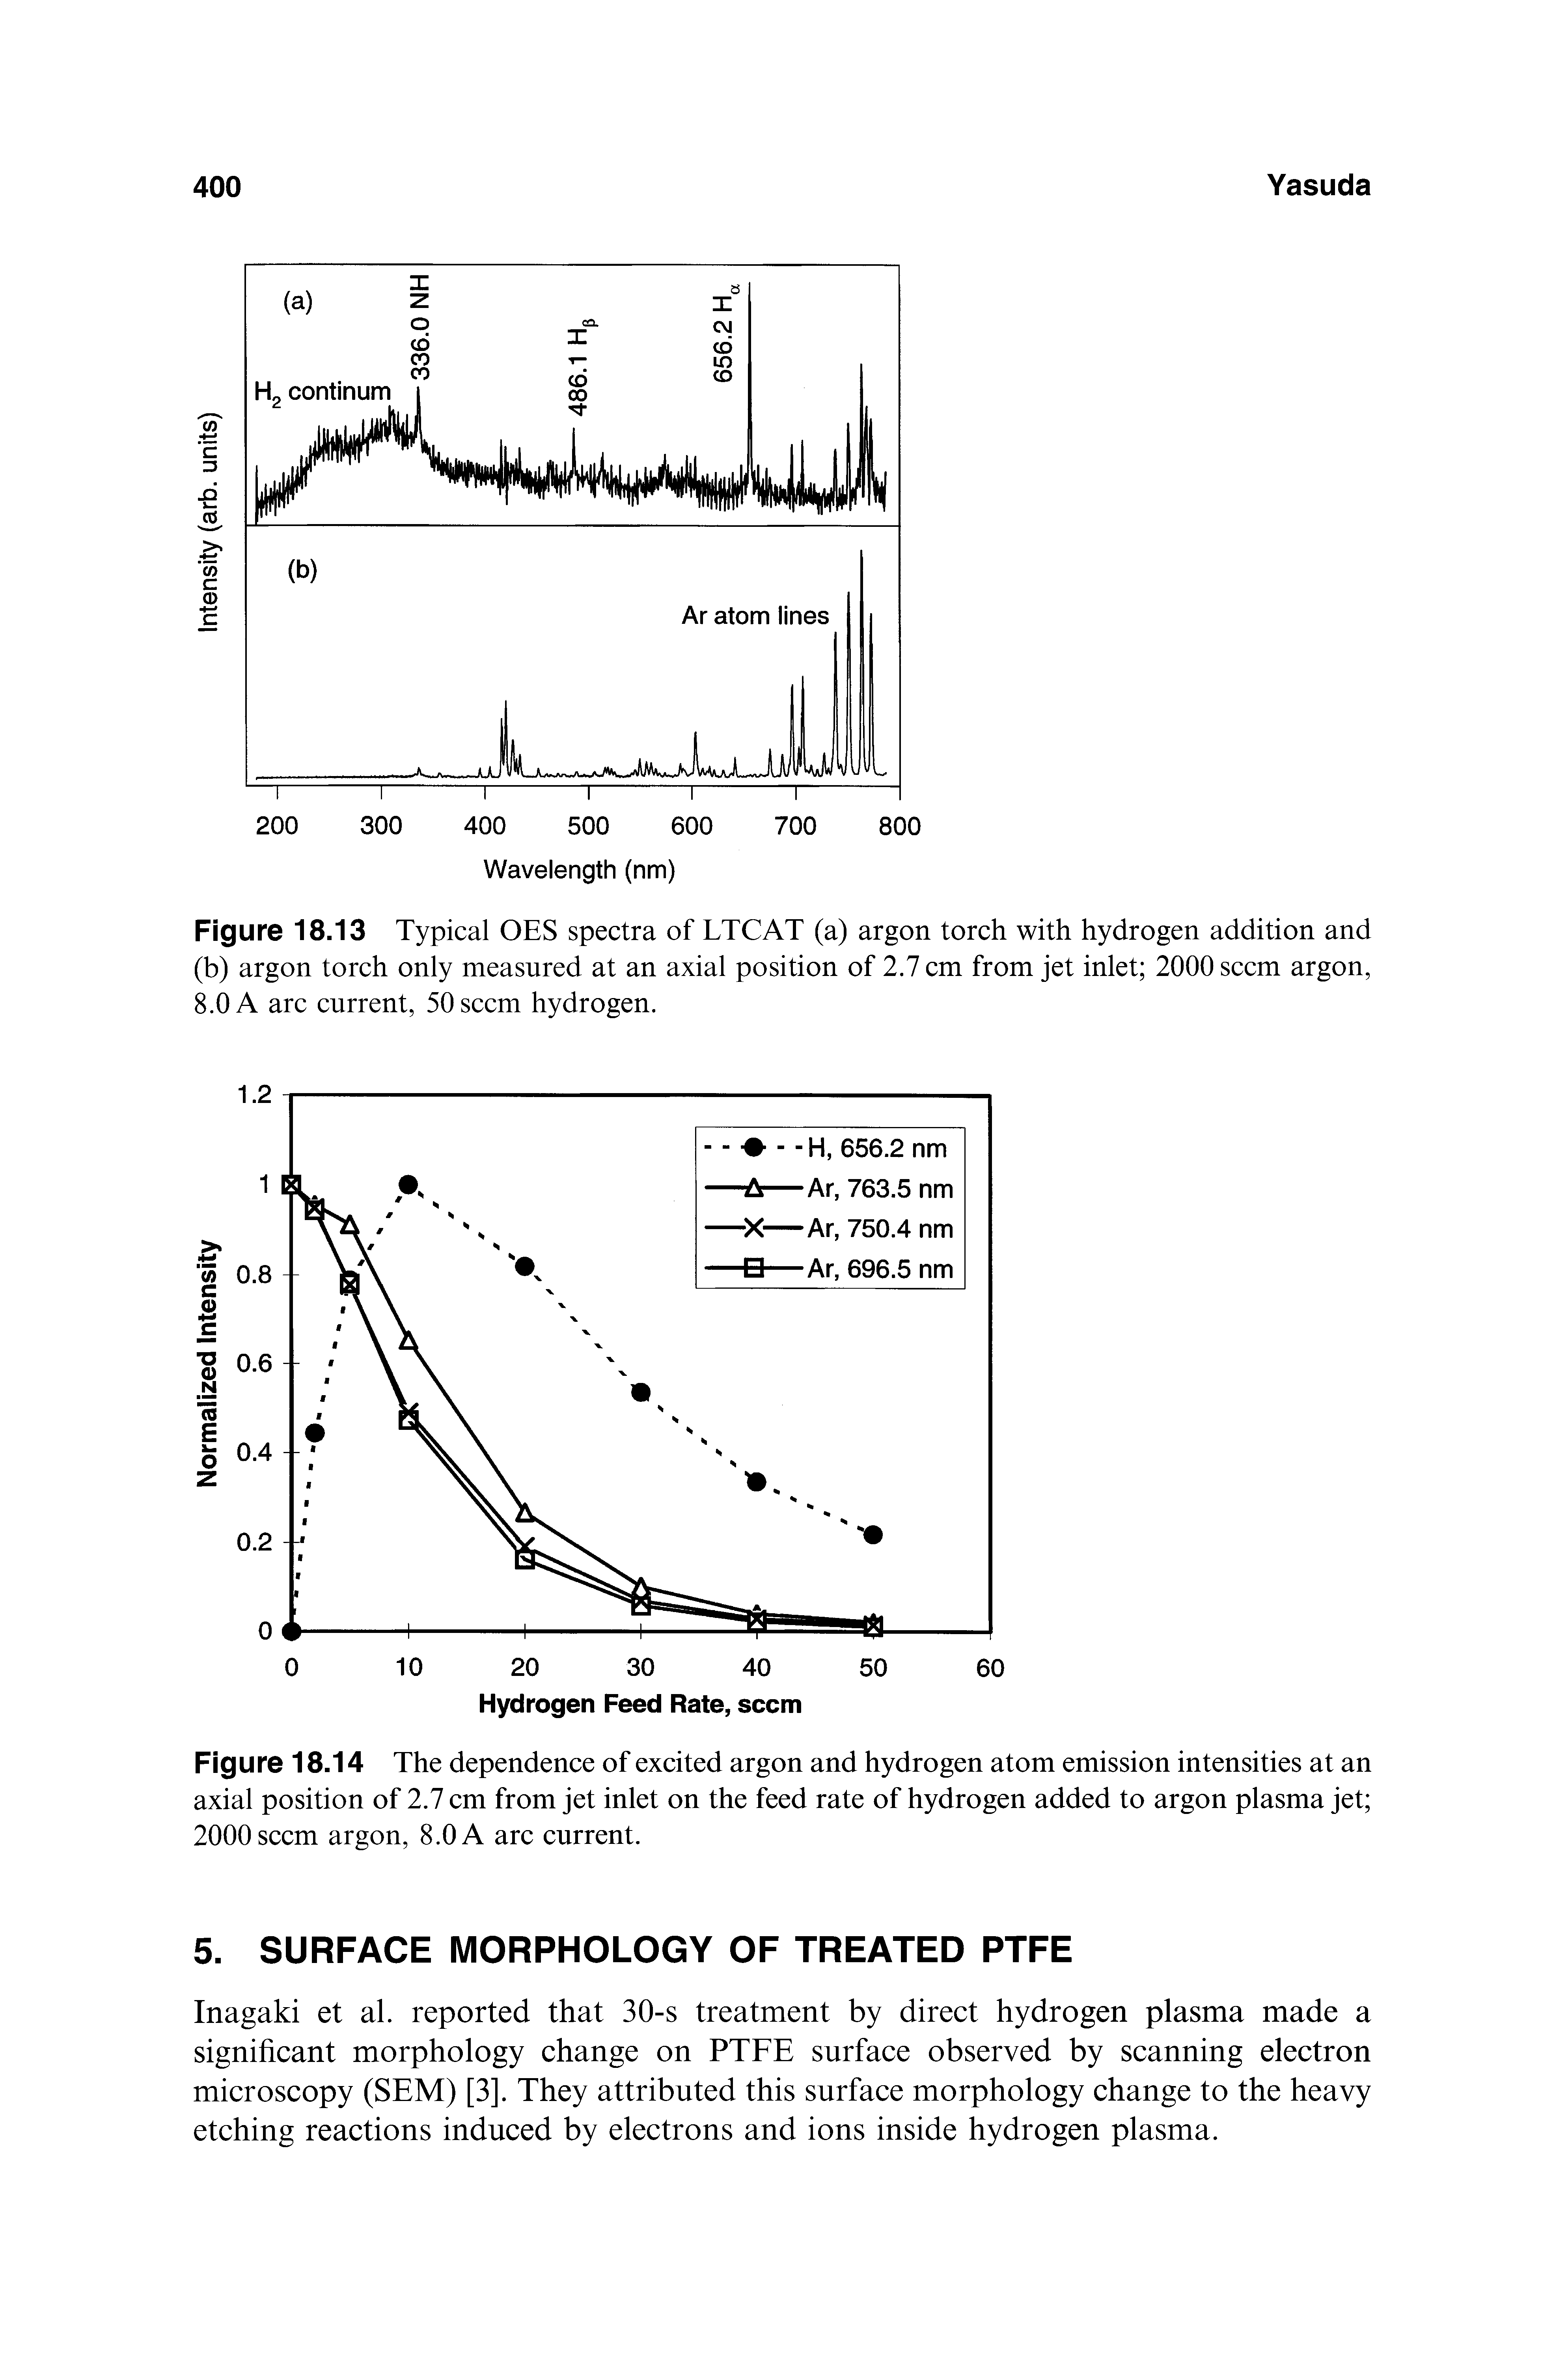 Figure 18.14 The dependence of excited argon and hydrogen atom emission intensities at an axial position of 2.7 cm from jet inlet on the feed rate of hydrogen added to argon plasma jet 2000 seem argon, 8.0 A arc current.